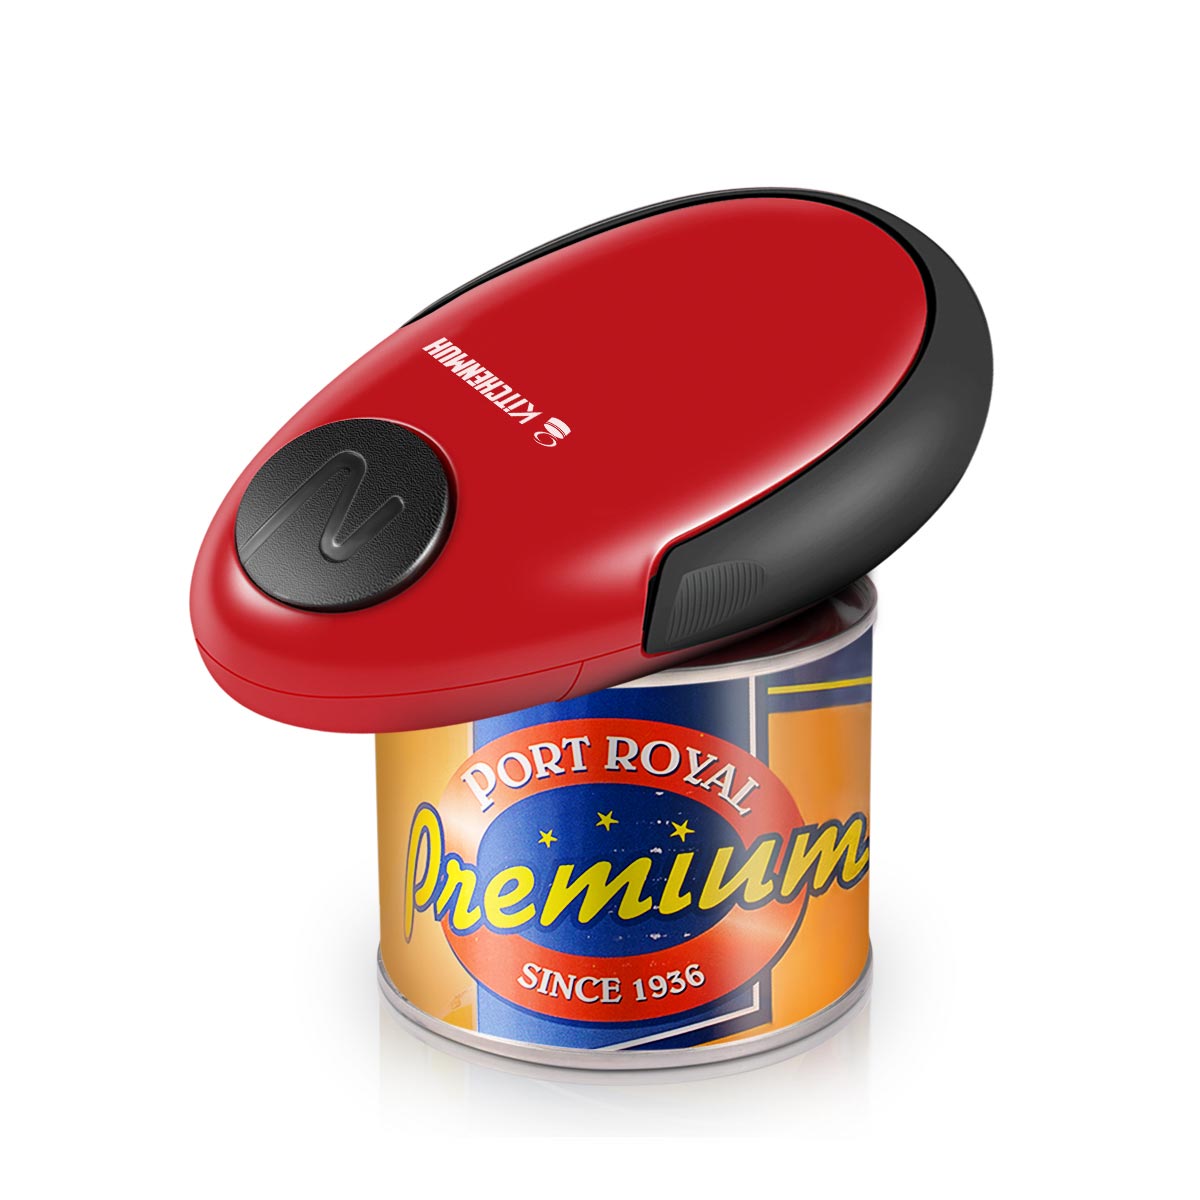 Electric Can Opener, Restaurant can Opener, Smooth Edge Automatic Electric Can Opener! Chef's Best Choice